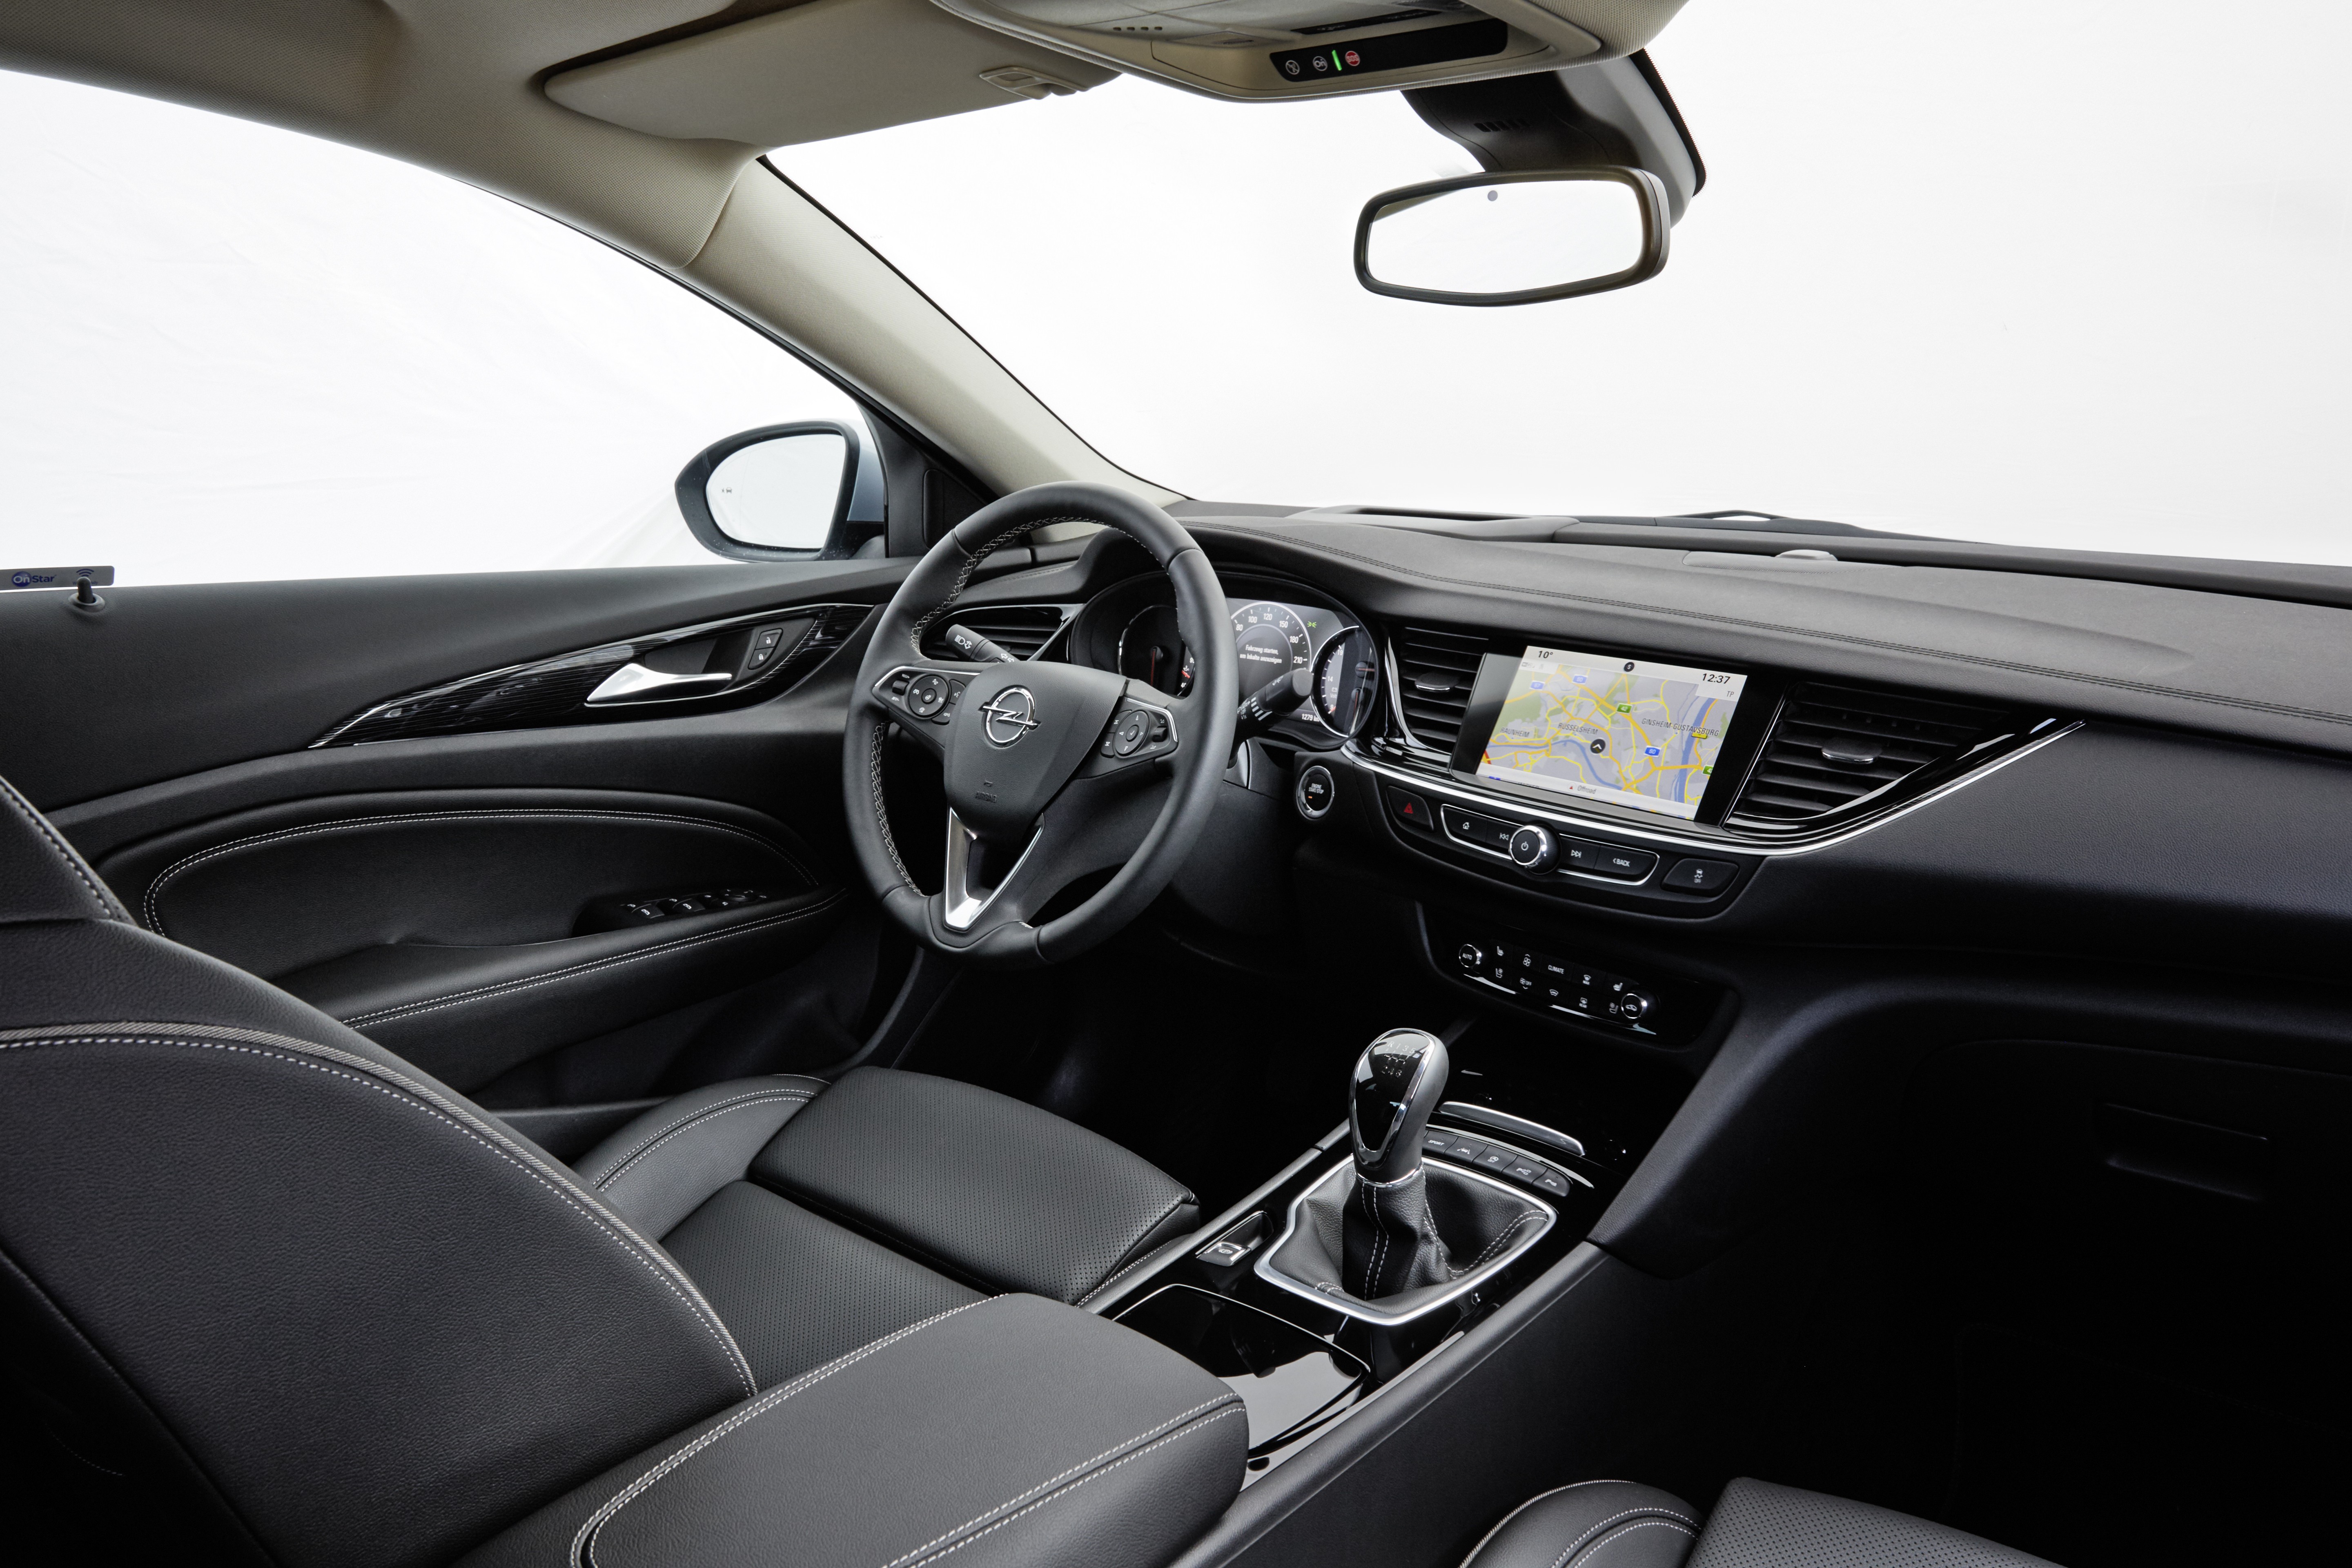 Opel Insignia Debut for Next-Generation Infotainment Systems